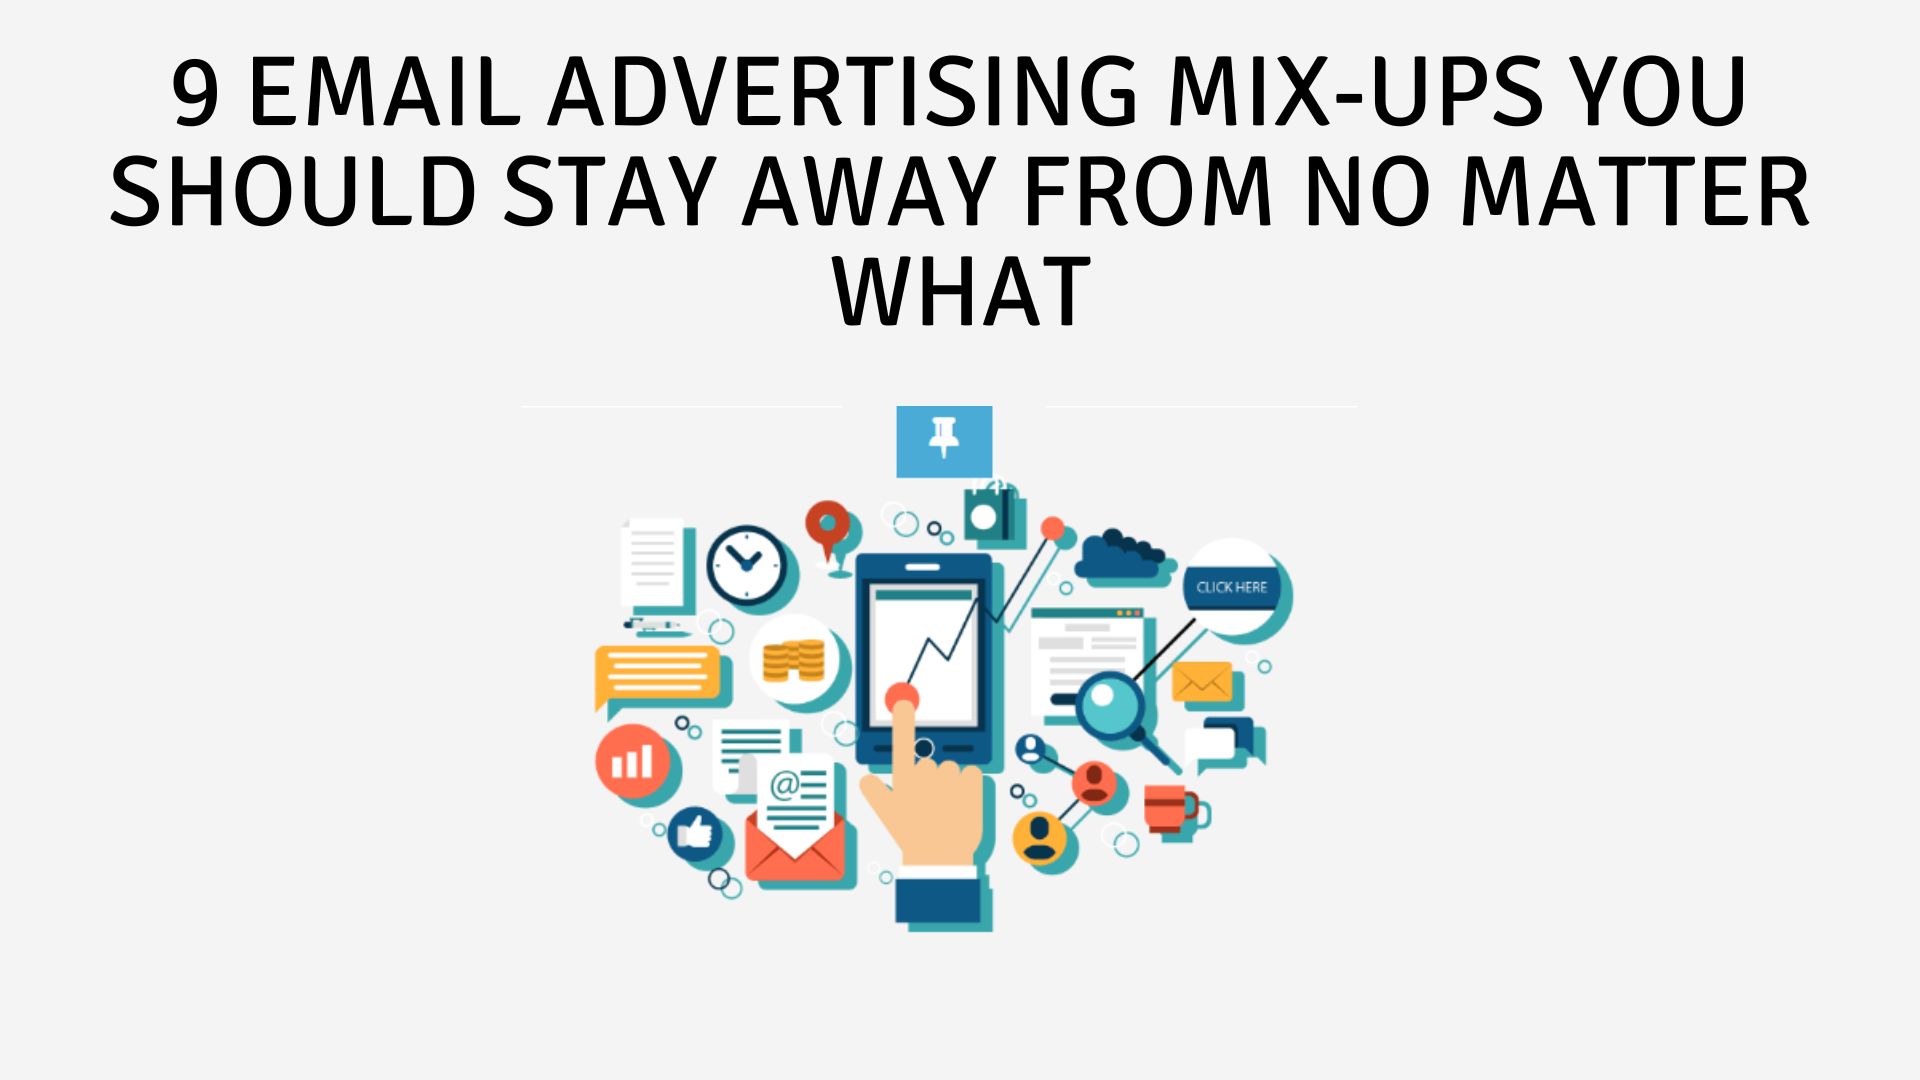 9 email advertising mix-ups you should stay away from no matter what